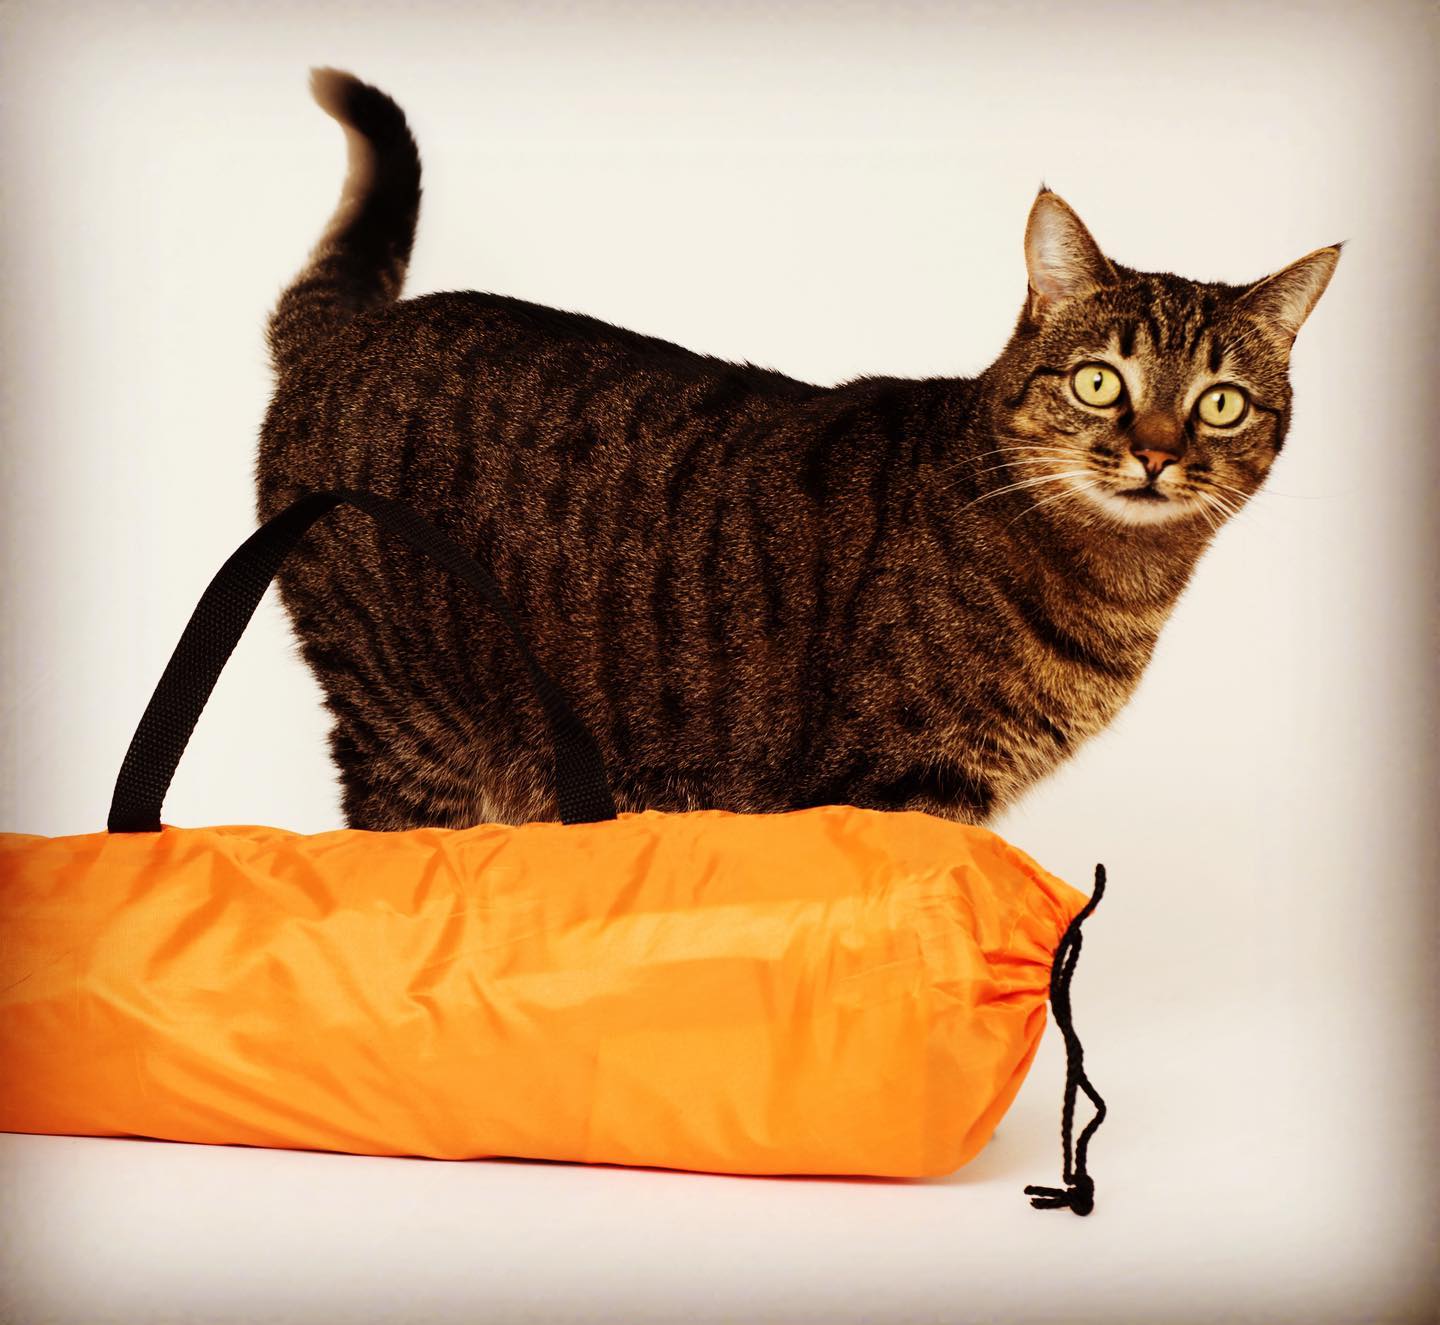 Cat Camp - Mini Camping Tent For Cats